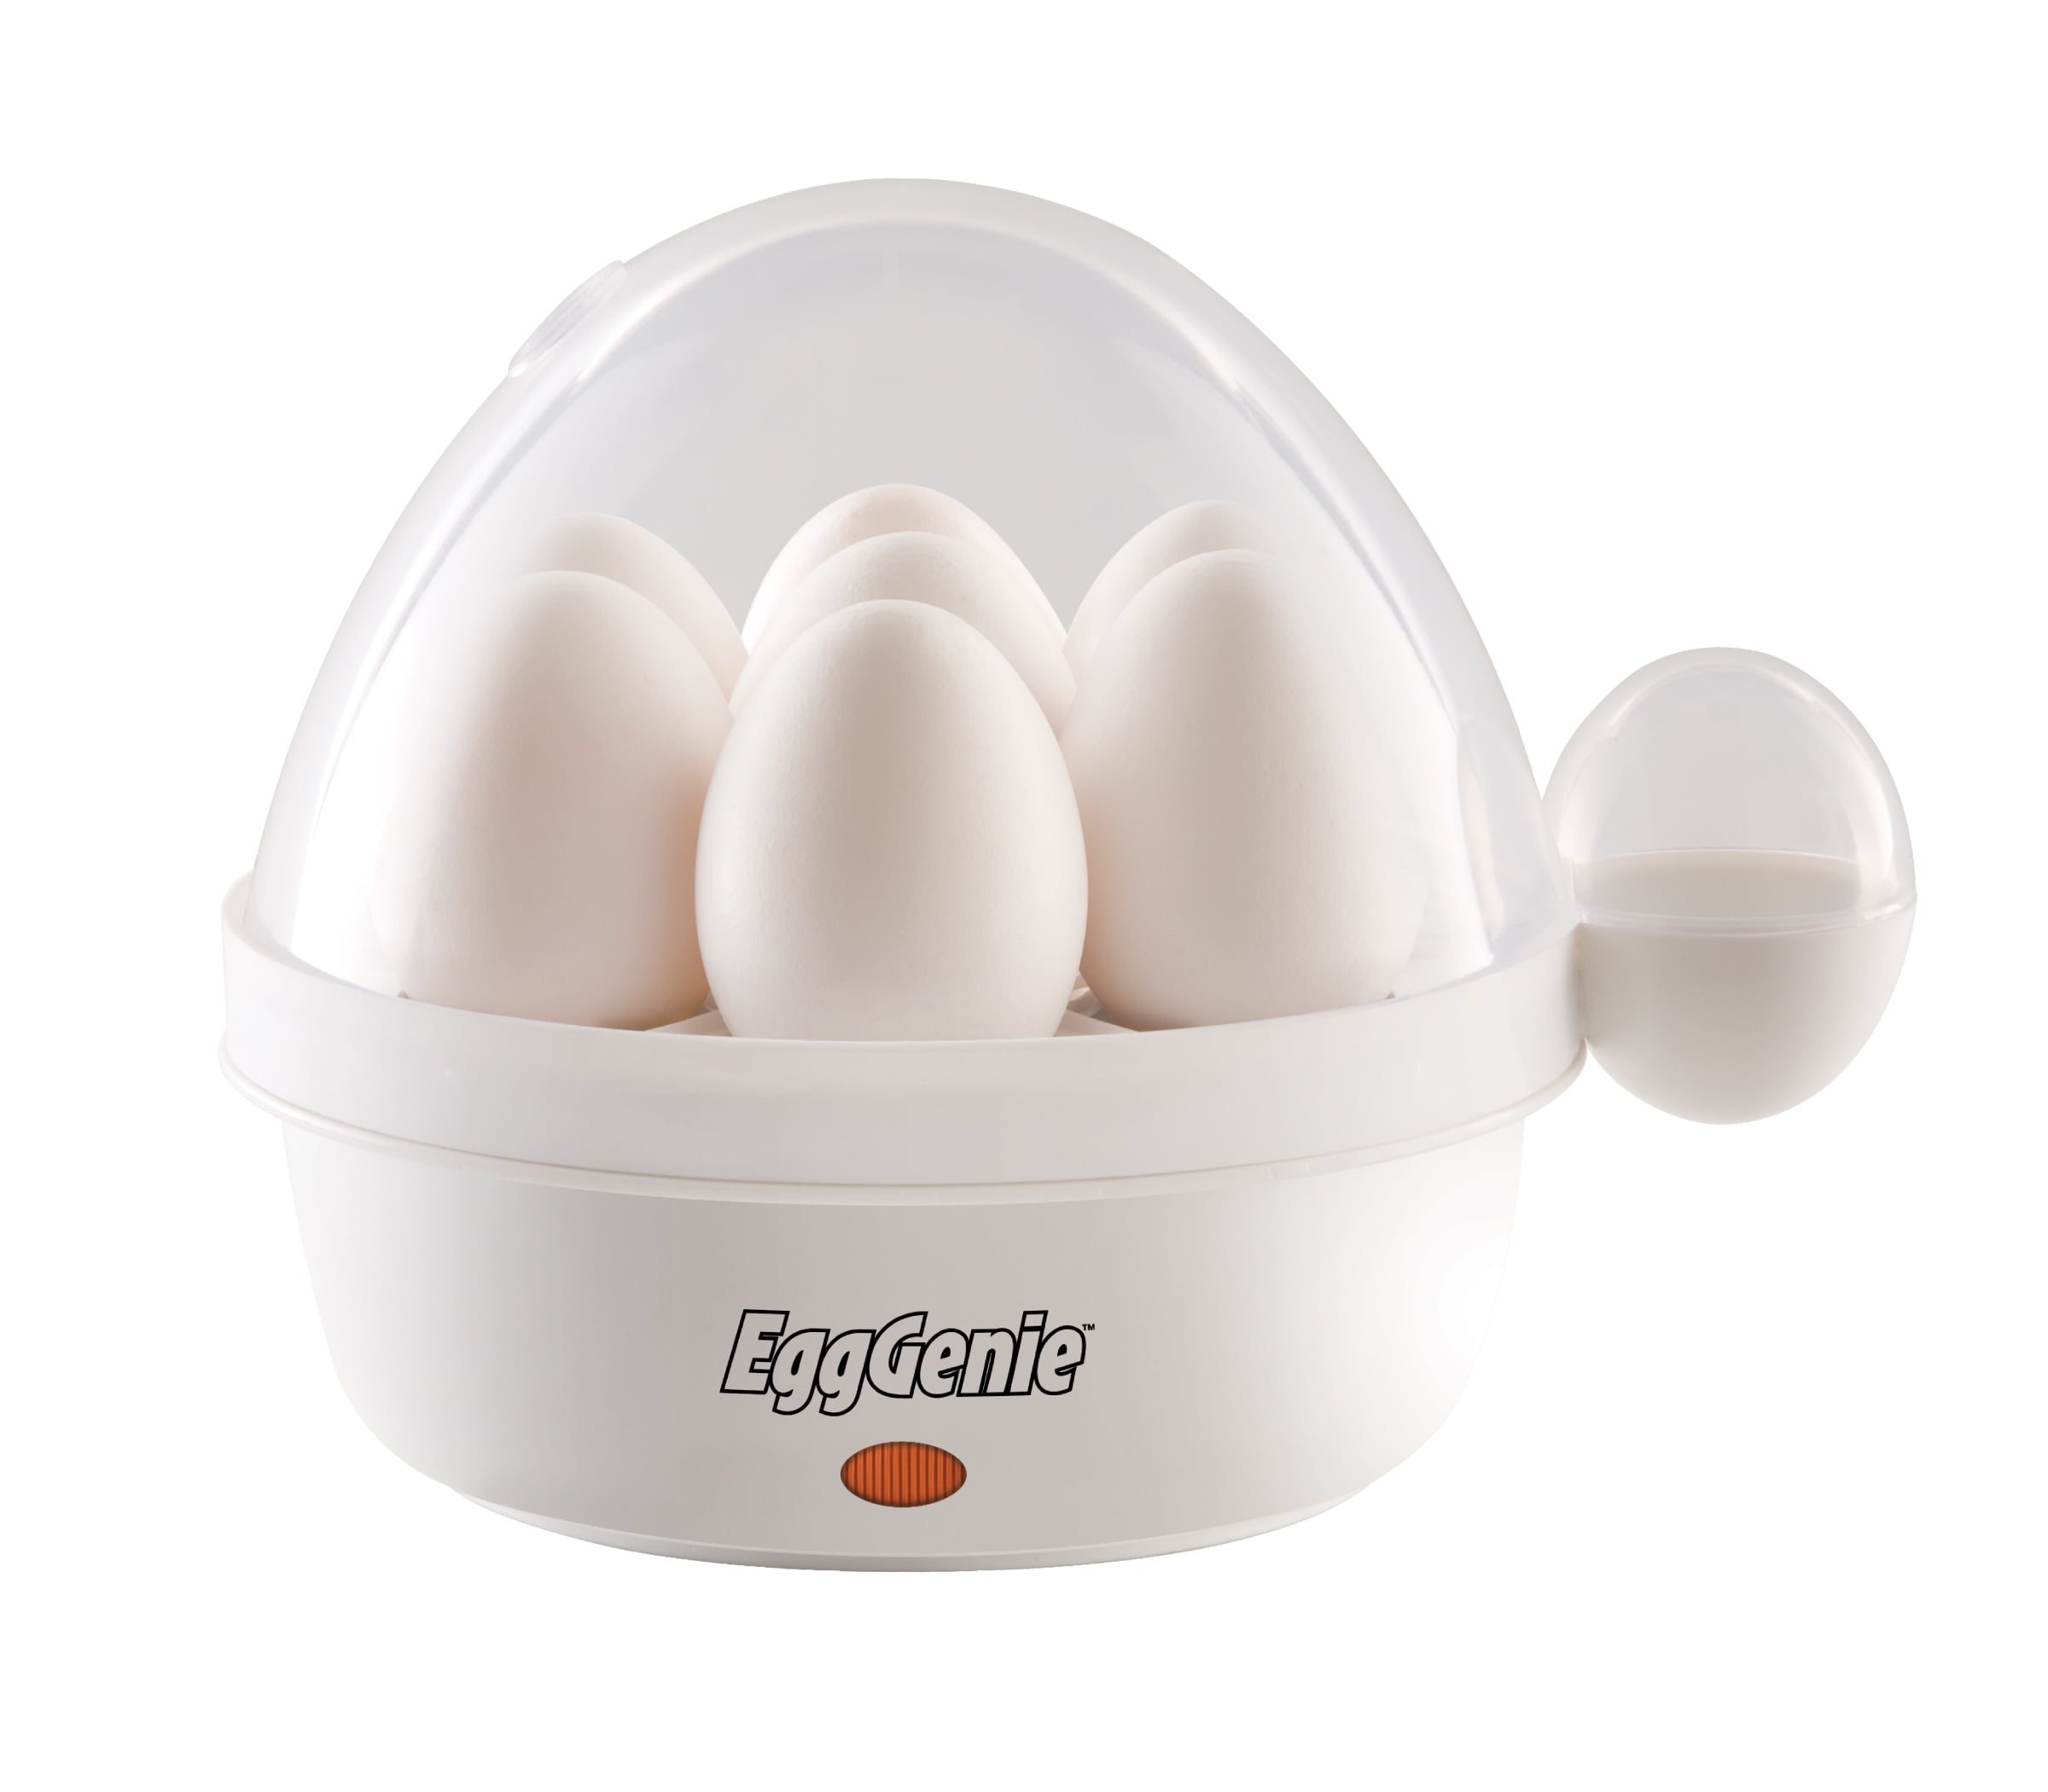 Egg Genie Electric Egg Cooker Poacher As Seen On TV Gently Used YW-9915